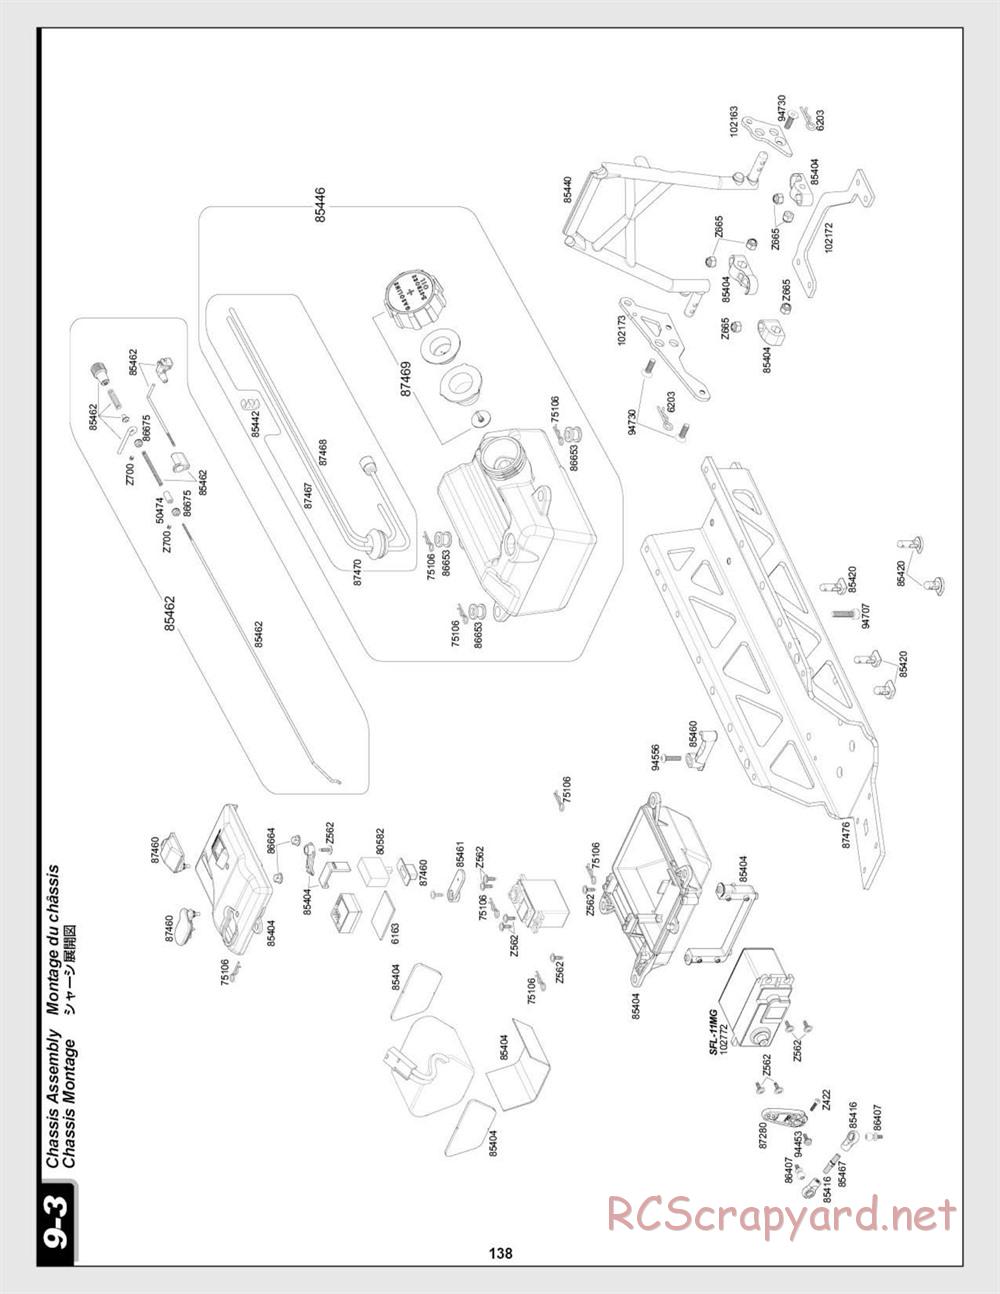 HPI - Baja 5SC SS - Exploded View - Page 138